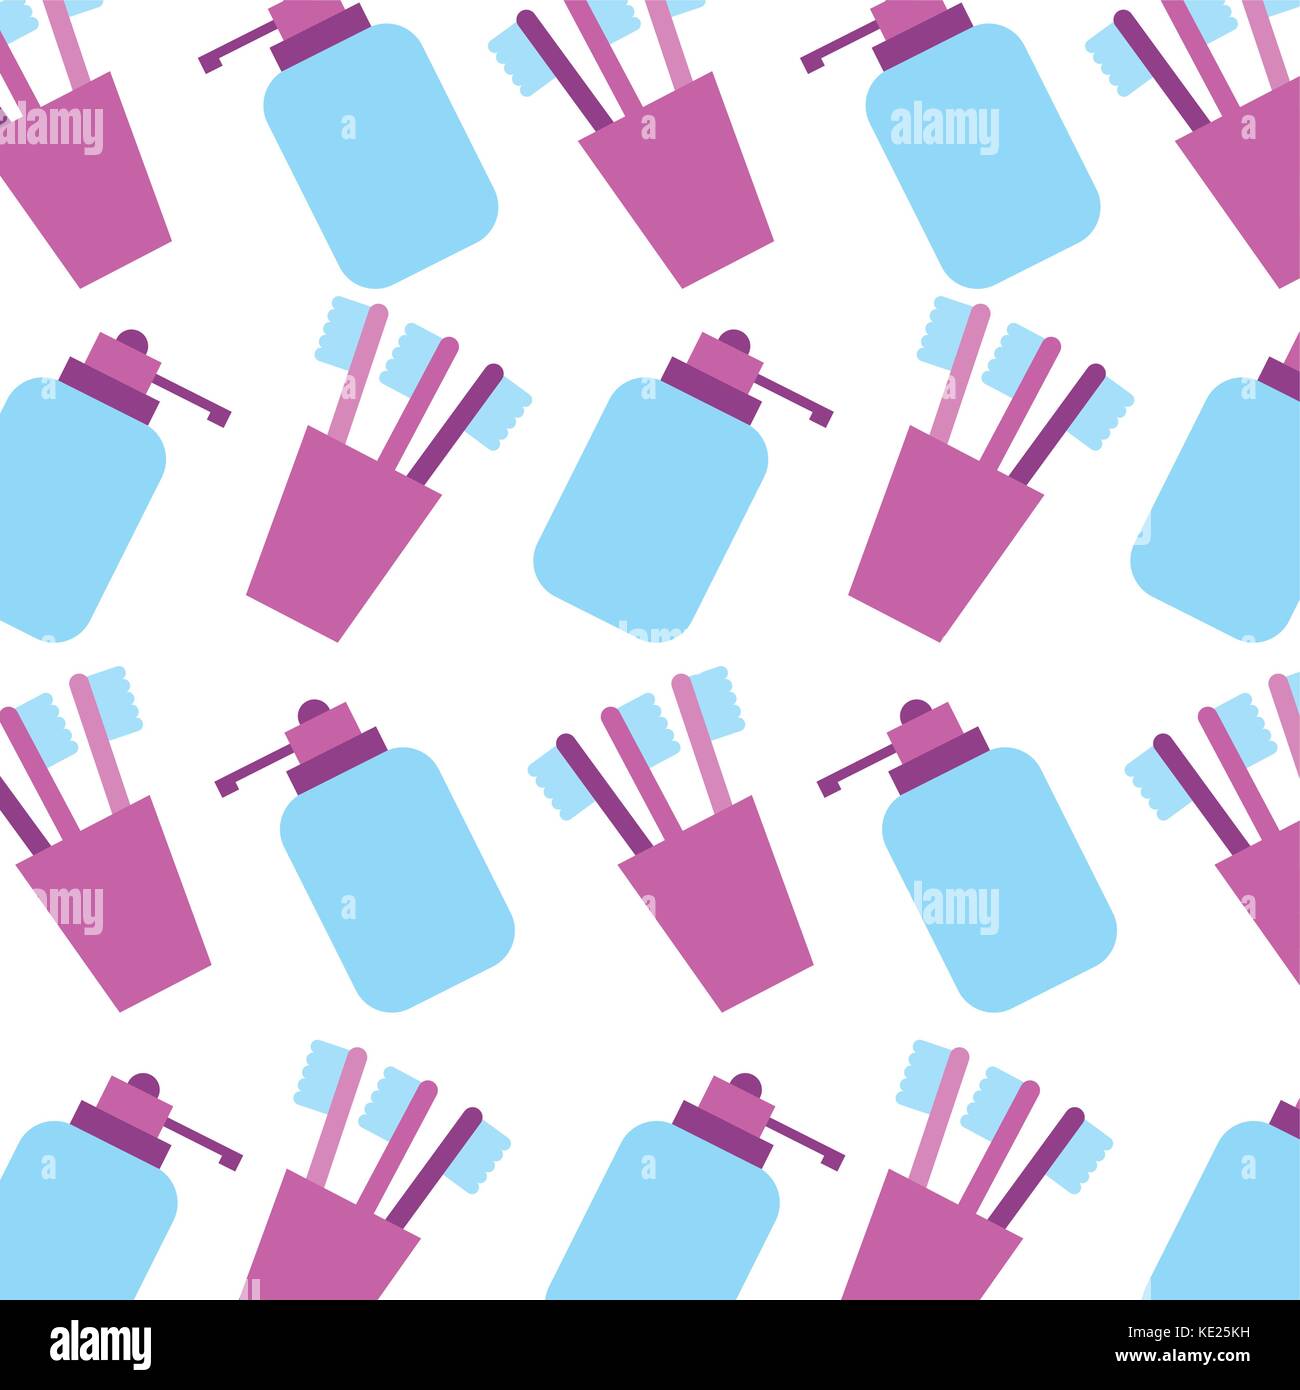 bathroom toothbrush and soap liquid seamless pattern design Stock Vector